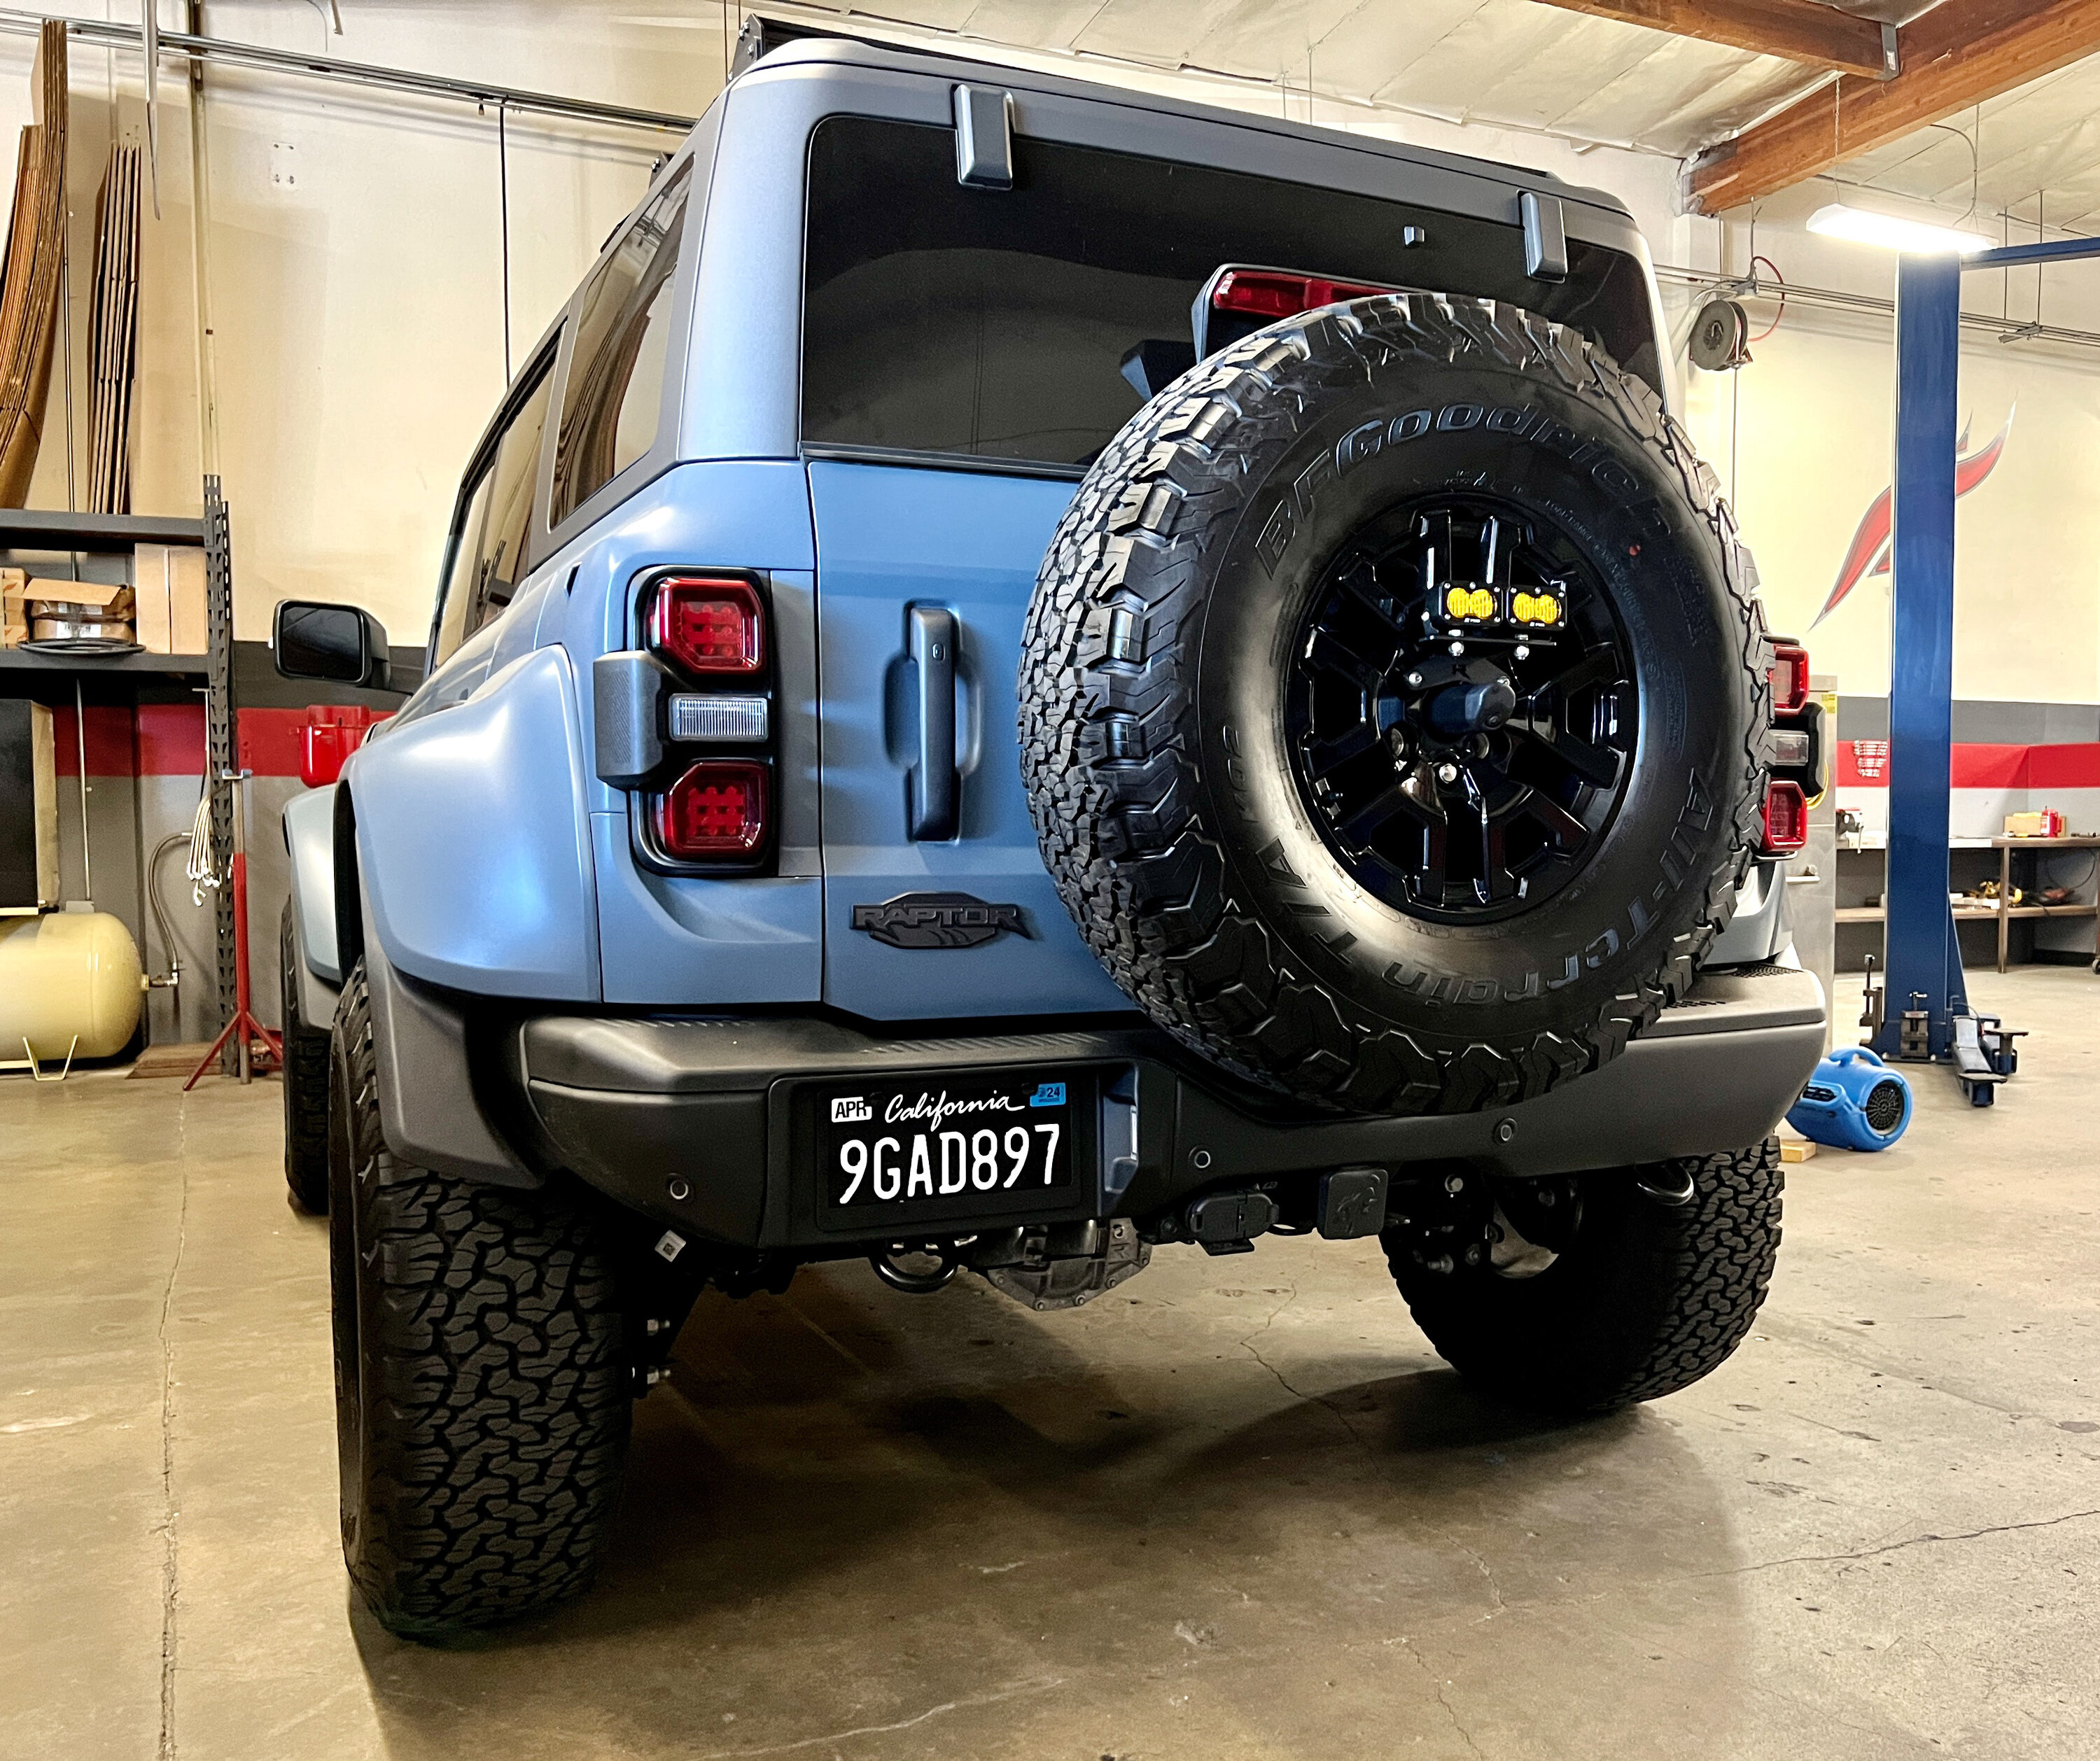 Ford Bronco Show Us Your Reverse / Rear Chase Lights! 3F55CE80-18BC-4F00-A0D8-F52185E4CFCA.JPEG